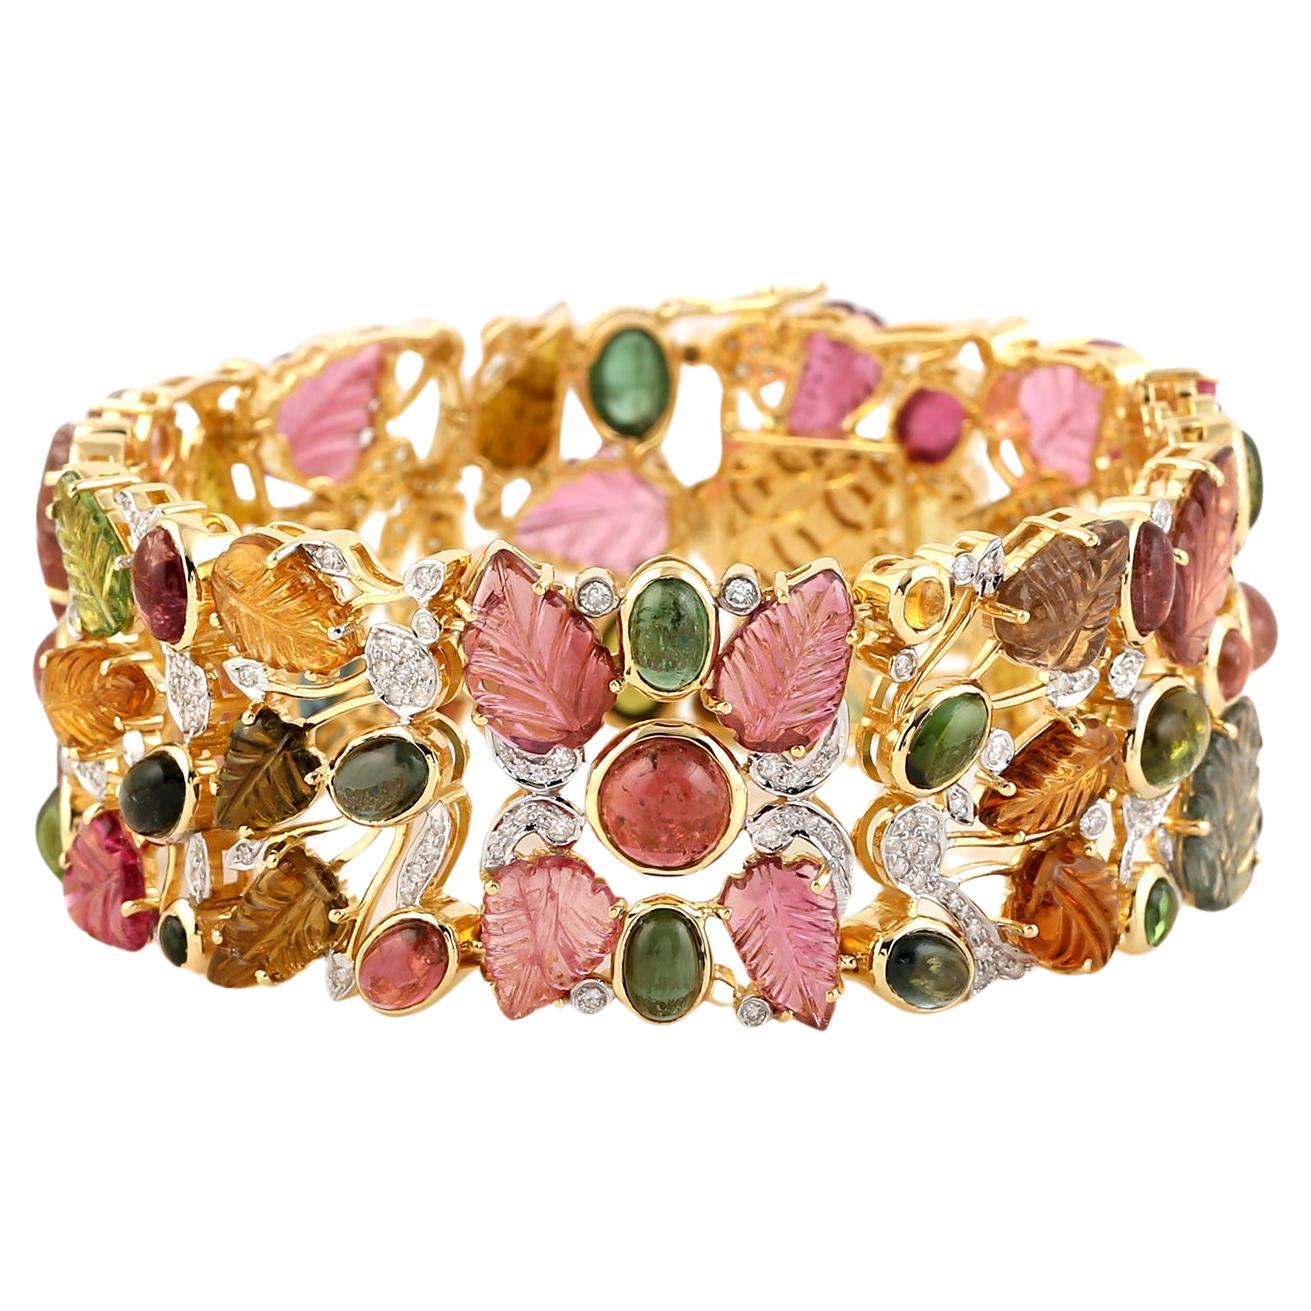 Multi Color Tourmaline Bracelet With Diamonds Made In 18k Yellow Gold